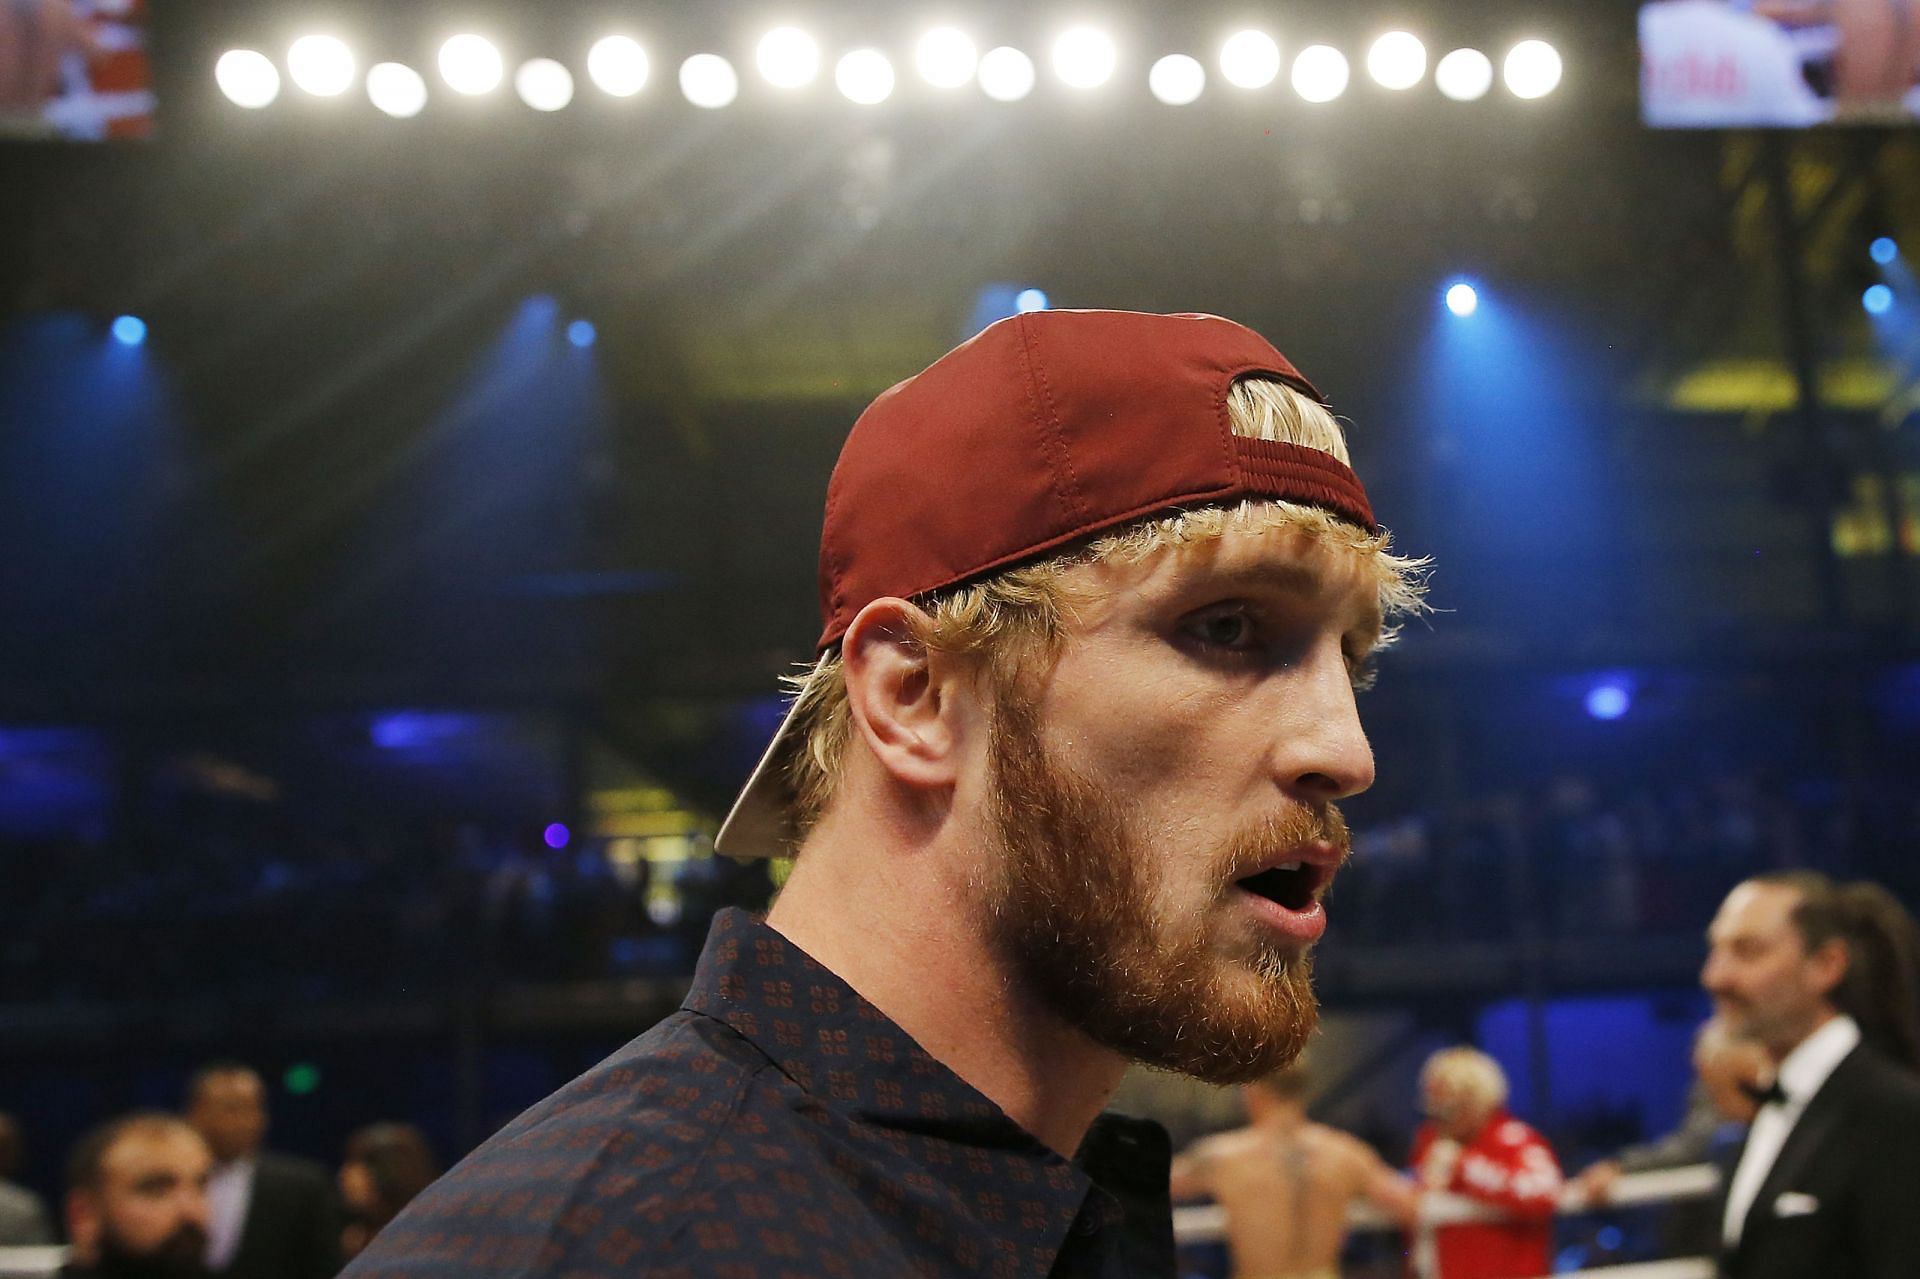 Logan Paul will likely return to the WWE ring soon.